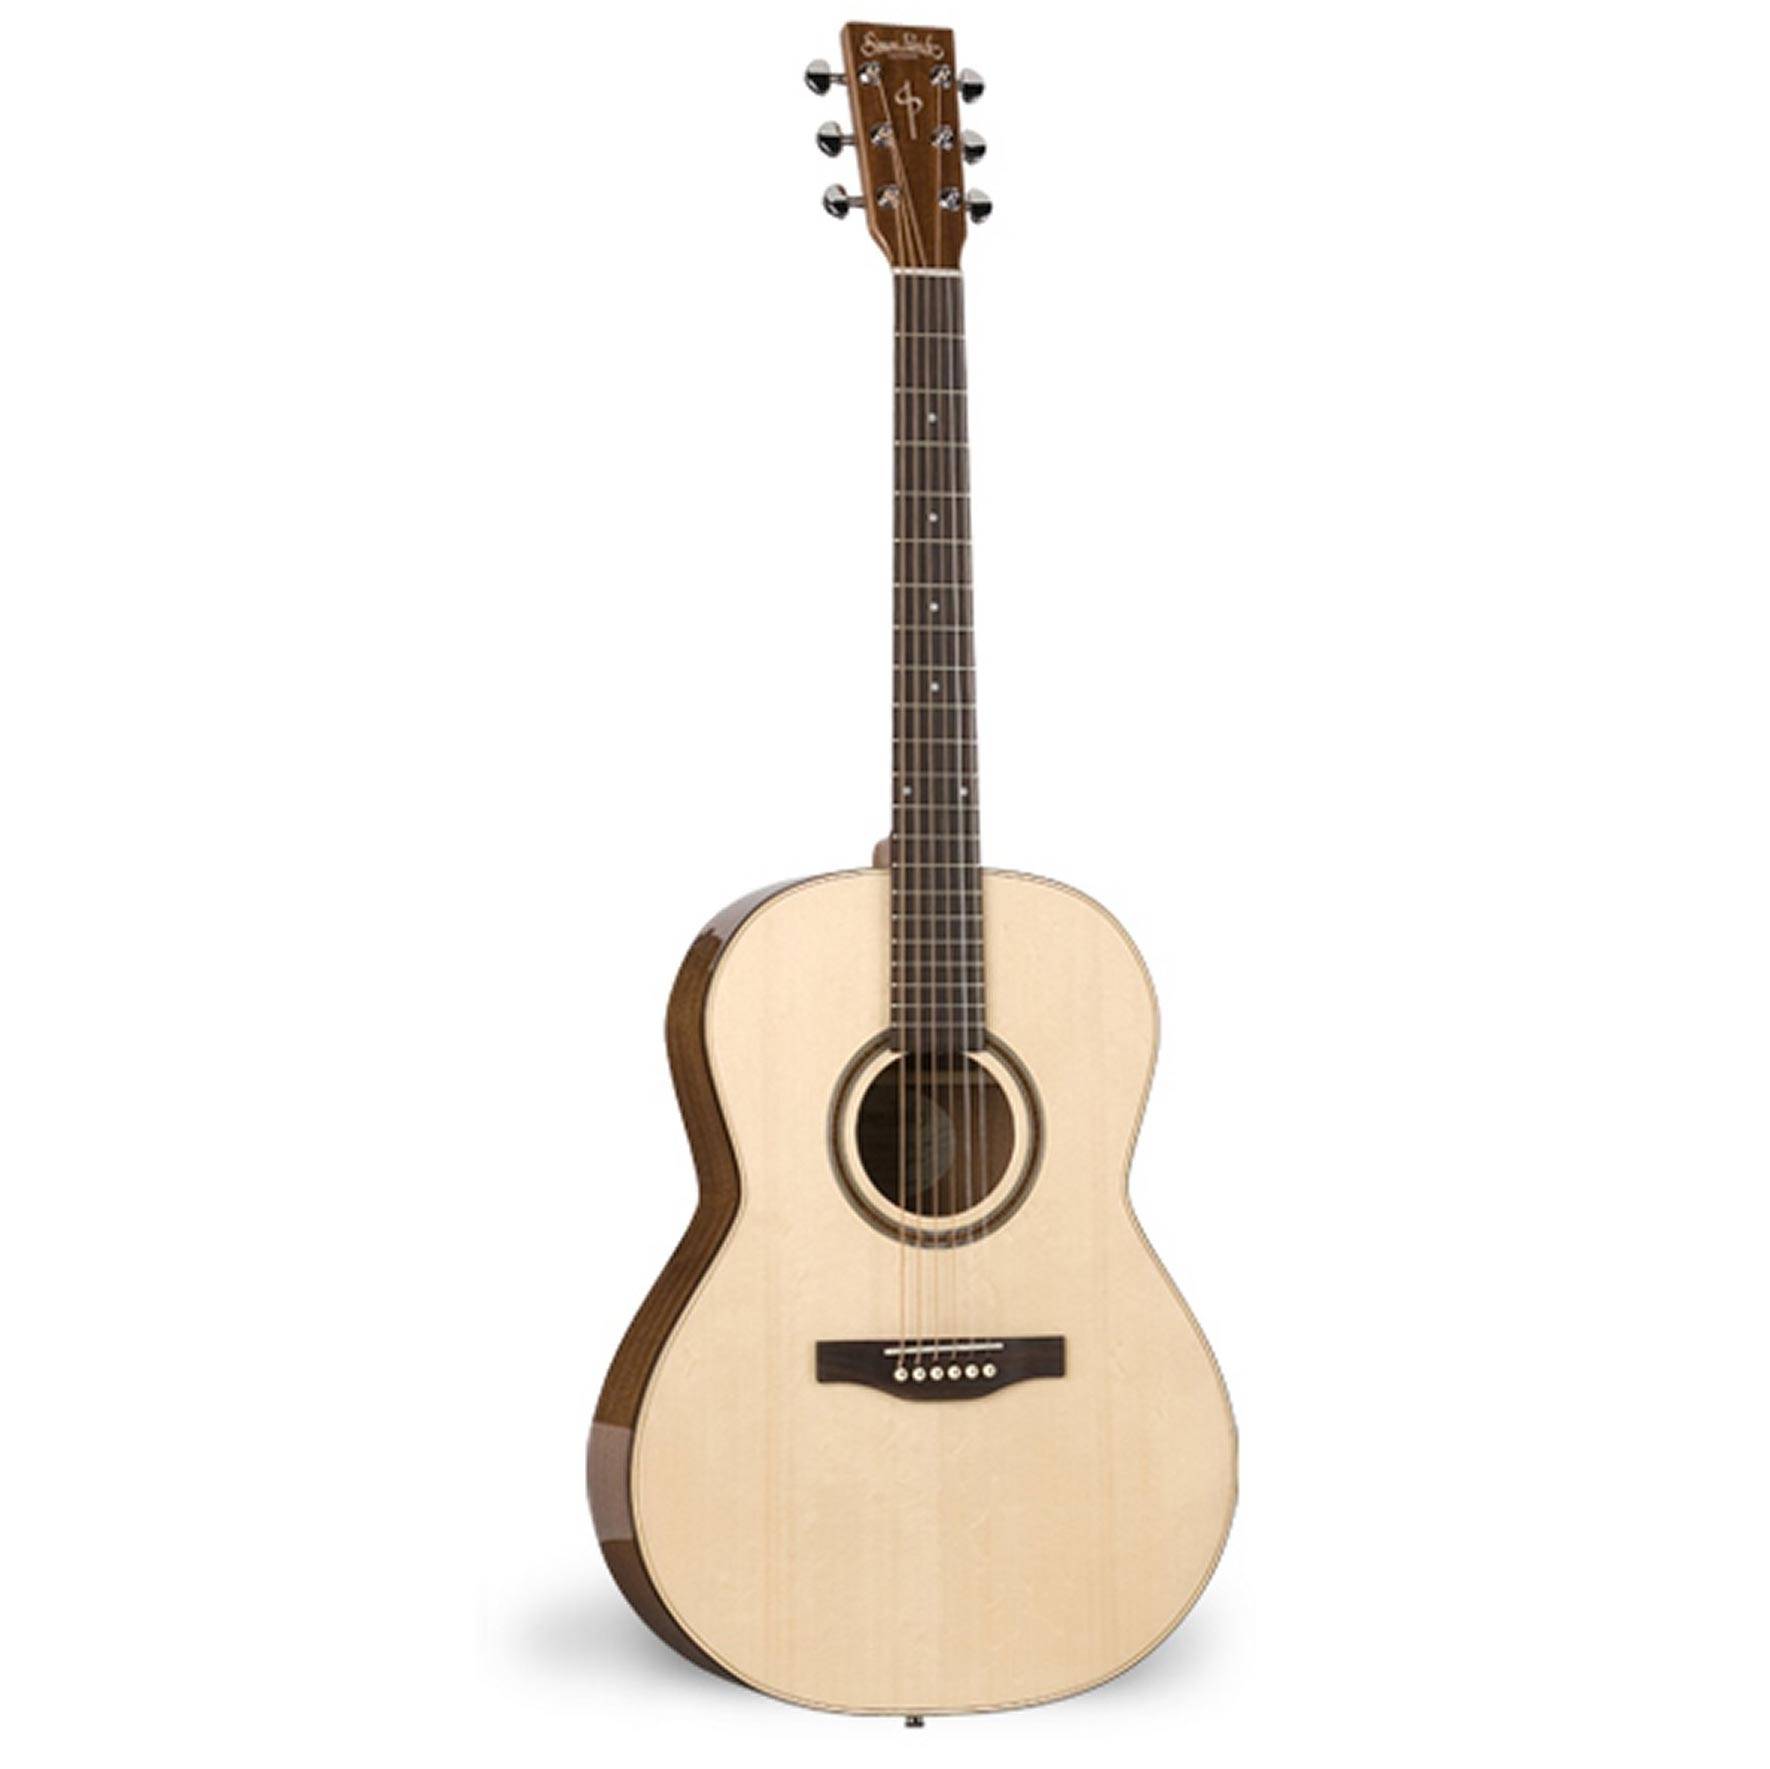 Simon & Patrick Woodland Pro Folk Spruce Natural High Gloss A3T Electric - Acoustic Guitar